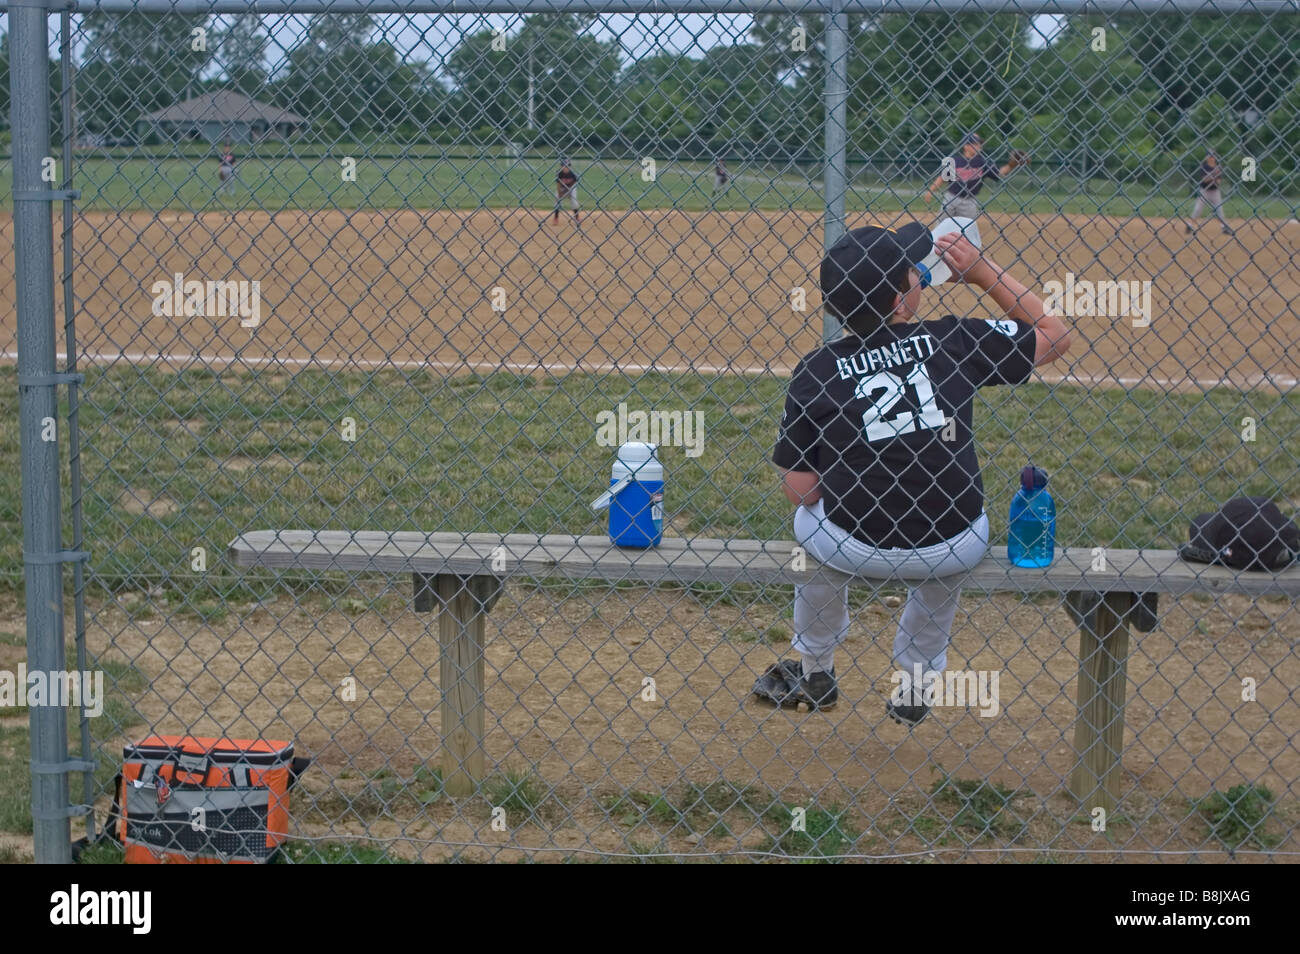 Little League baseball player drinks water sitting on bench, Ohio USA sports drinking Stock Photo